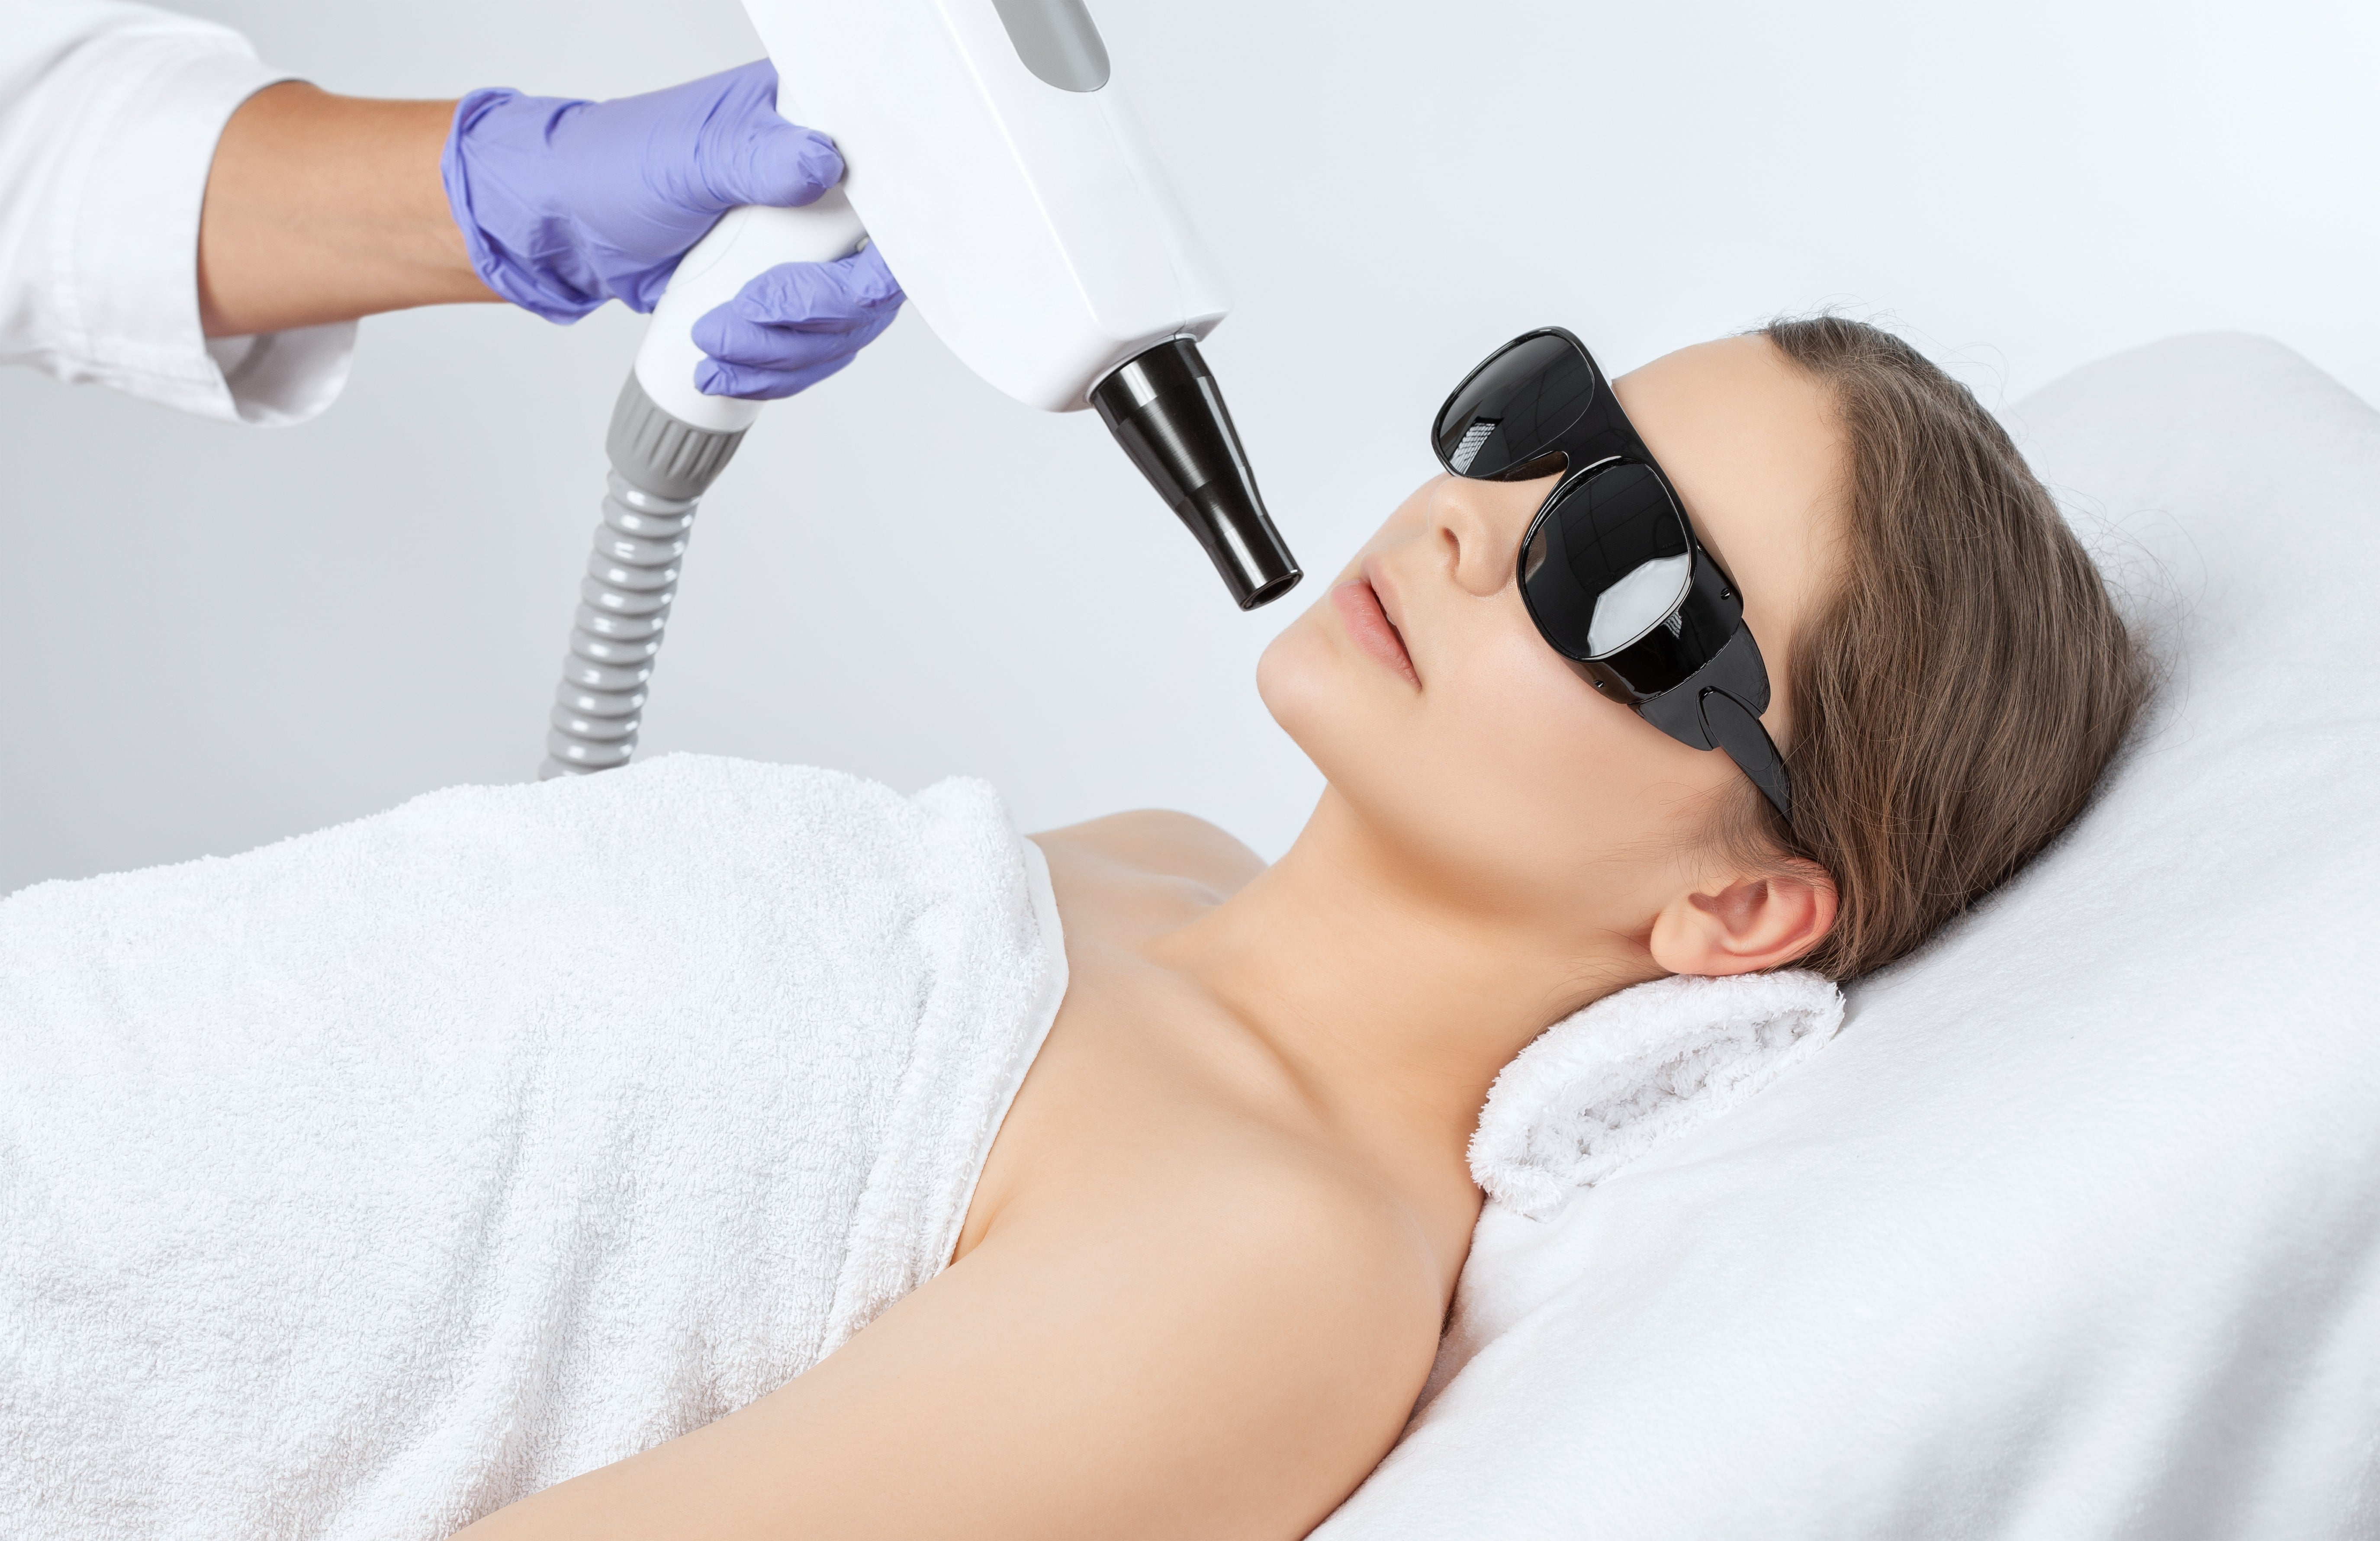 Laser & Injectable Services